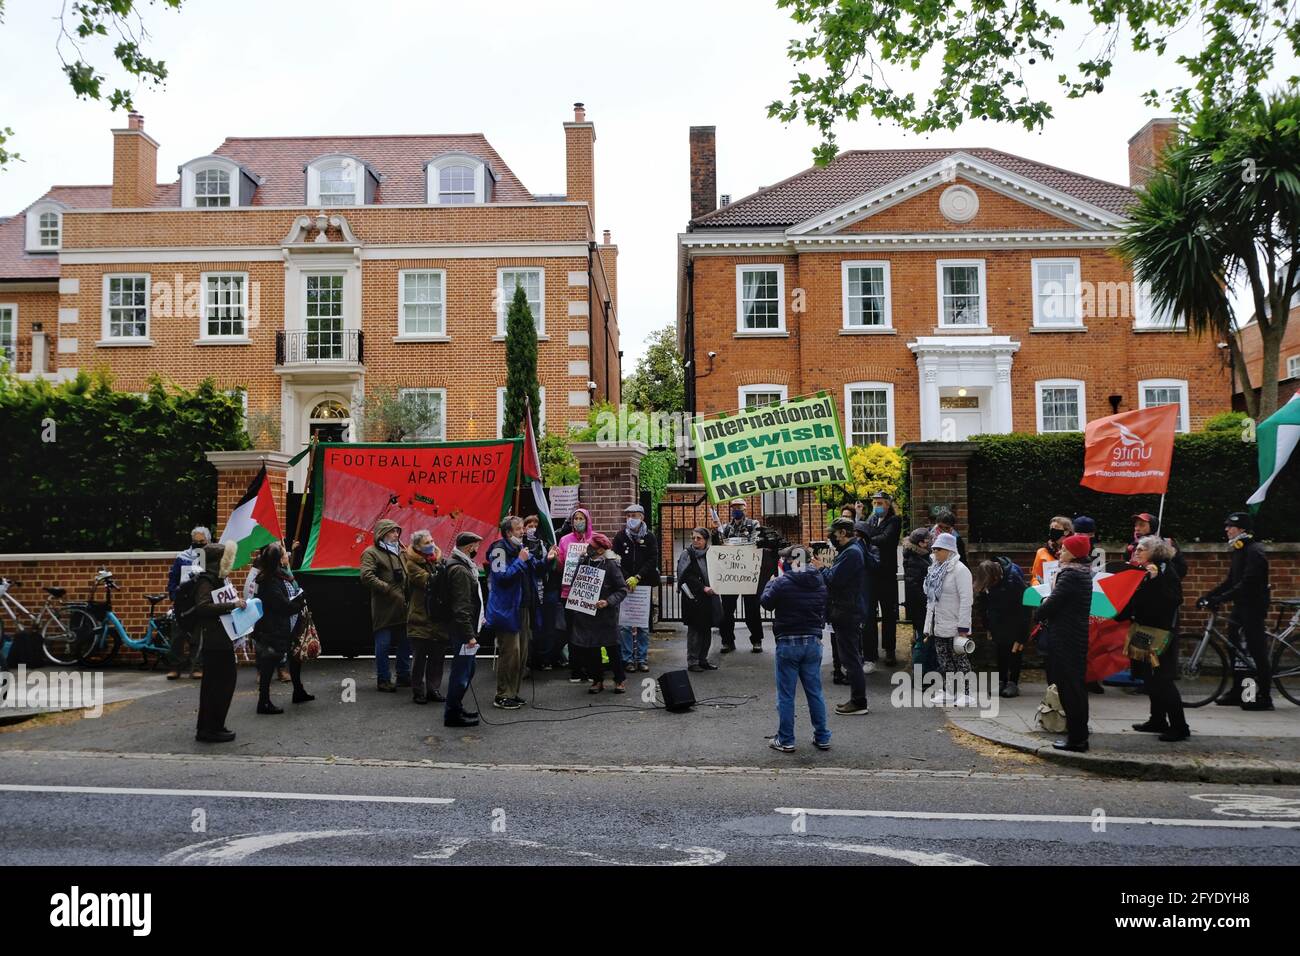 The anti-Zionist Jewish community in London stage a protest outside the Israeli ambassador to the UK's residence in solidarity with Palestine. Stock Photo